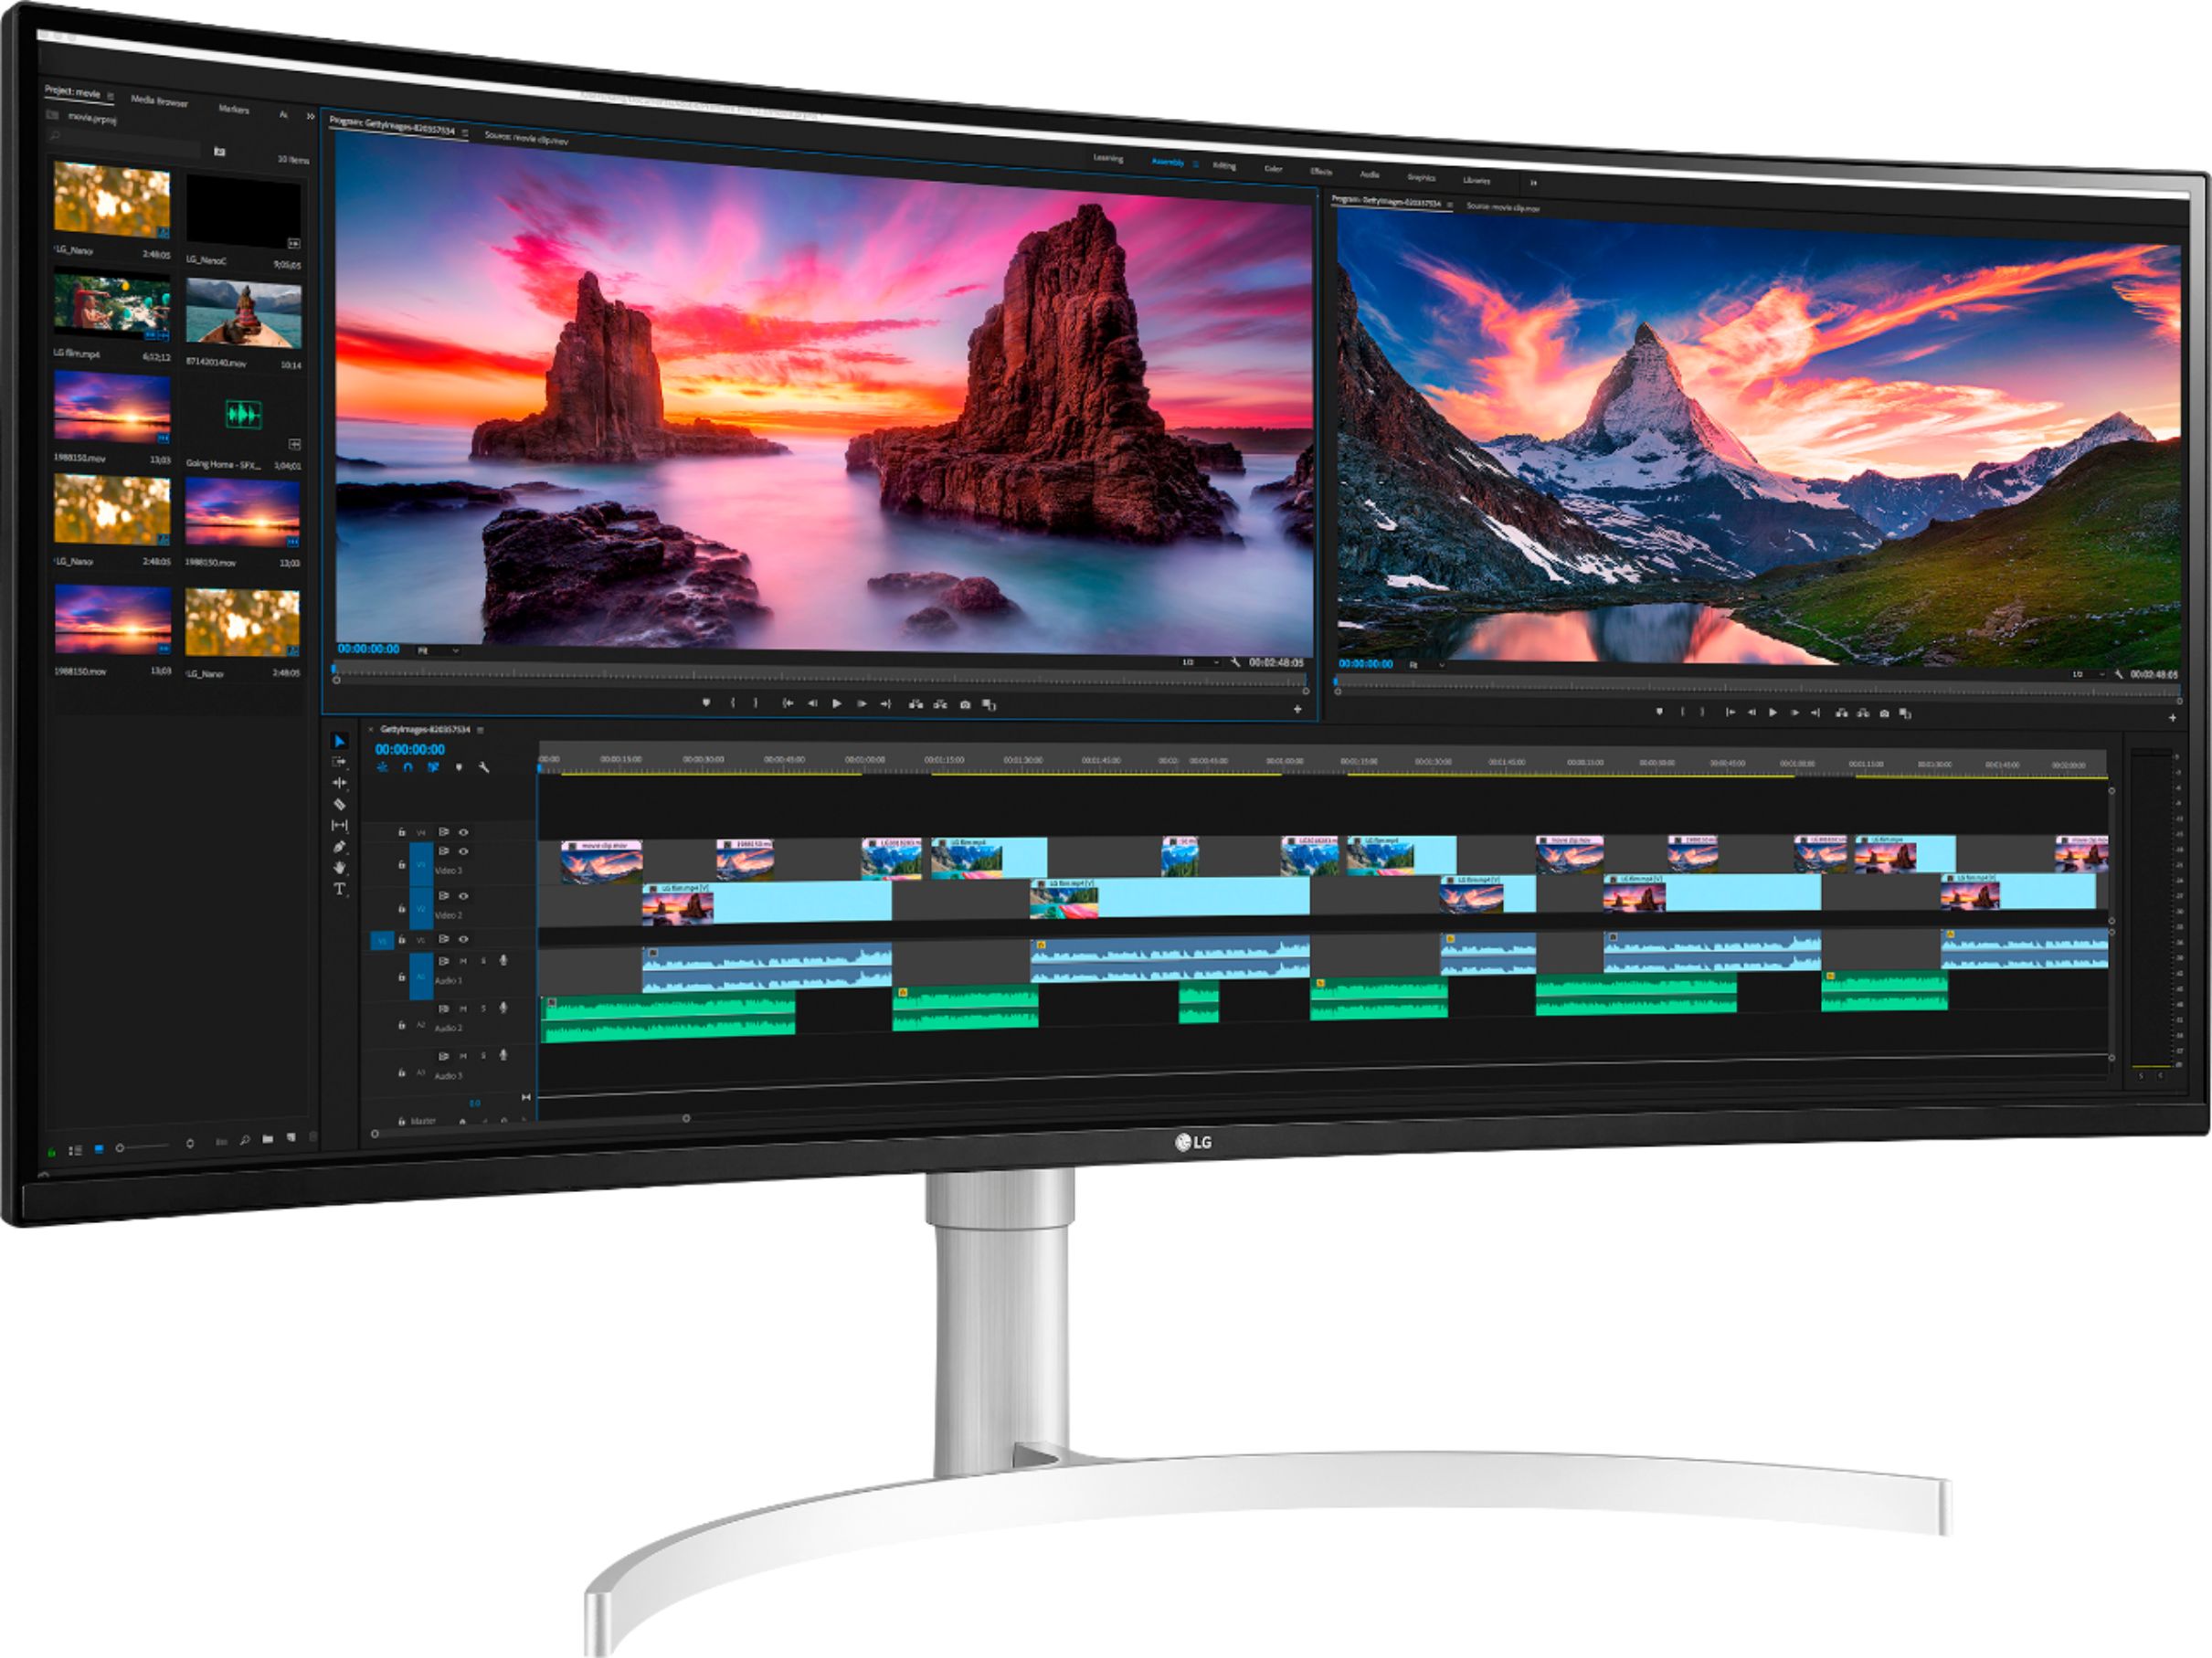 Angle View: LG - 38” IPS UltraWide 21:9 Curved 144Hz G-SYNC Compatibillity Monitor with HDR (Thunderbolt) - Silver